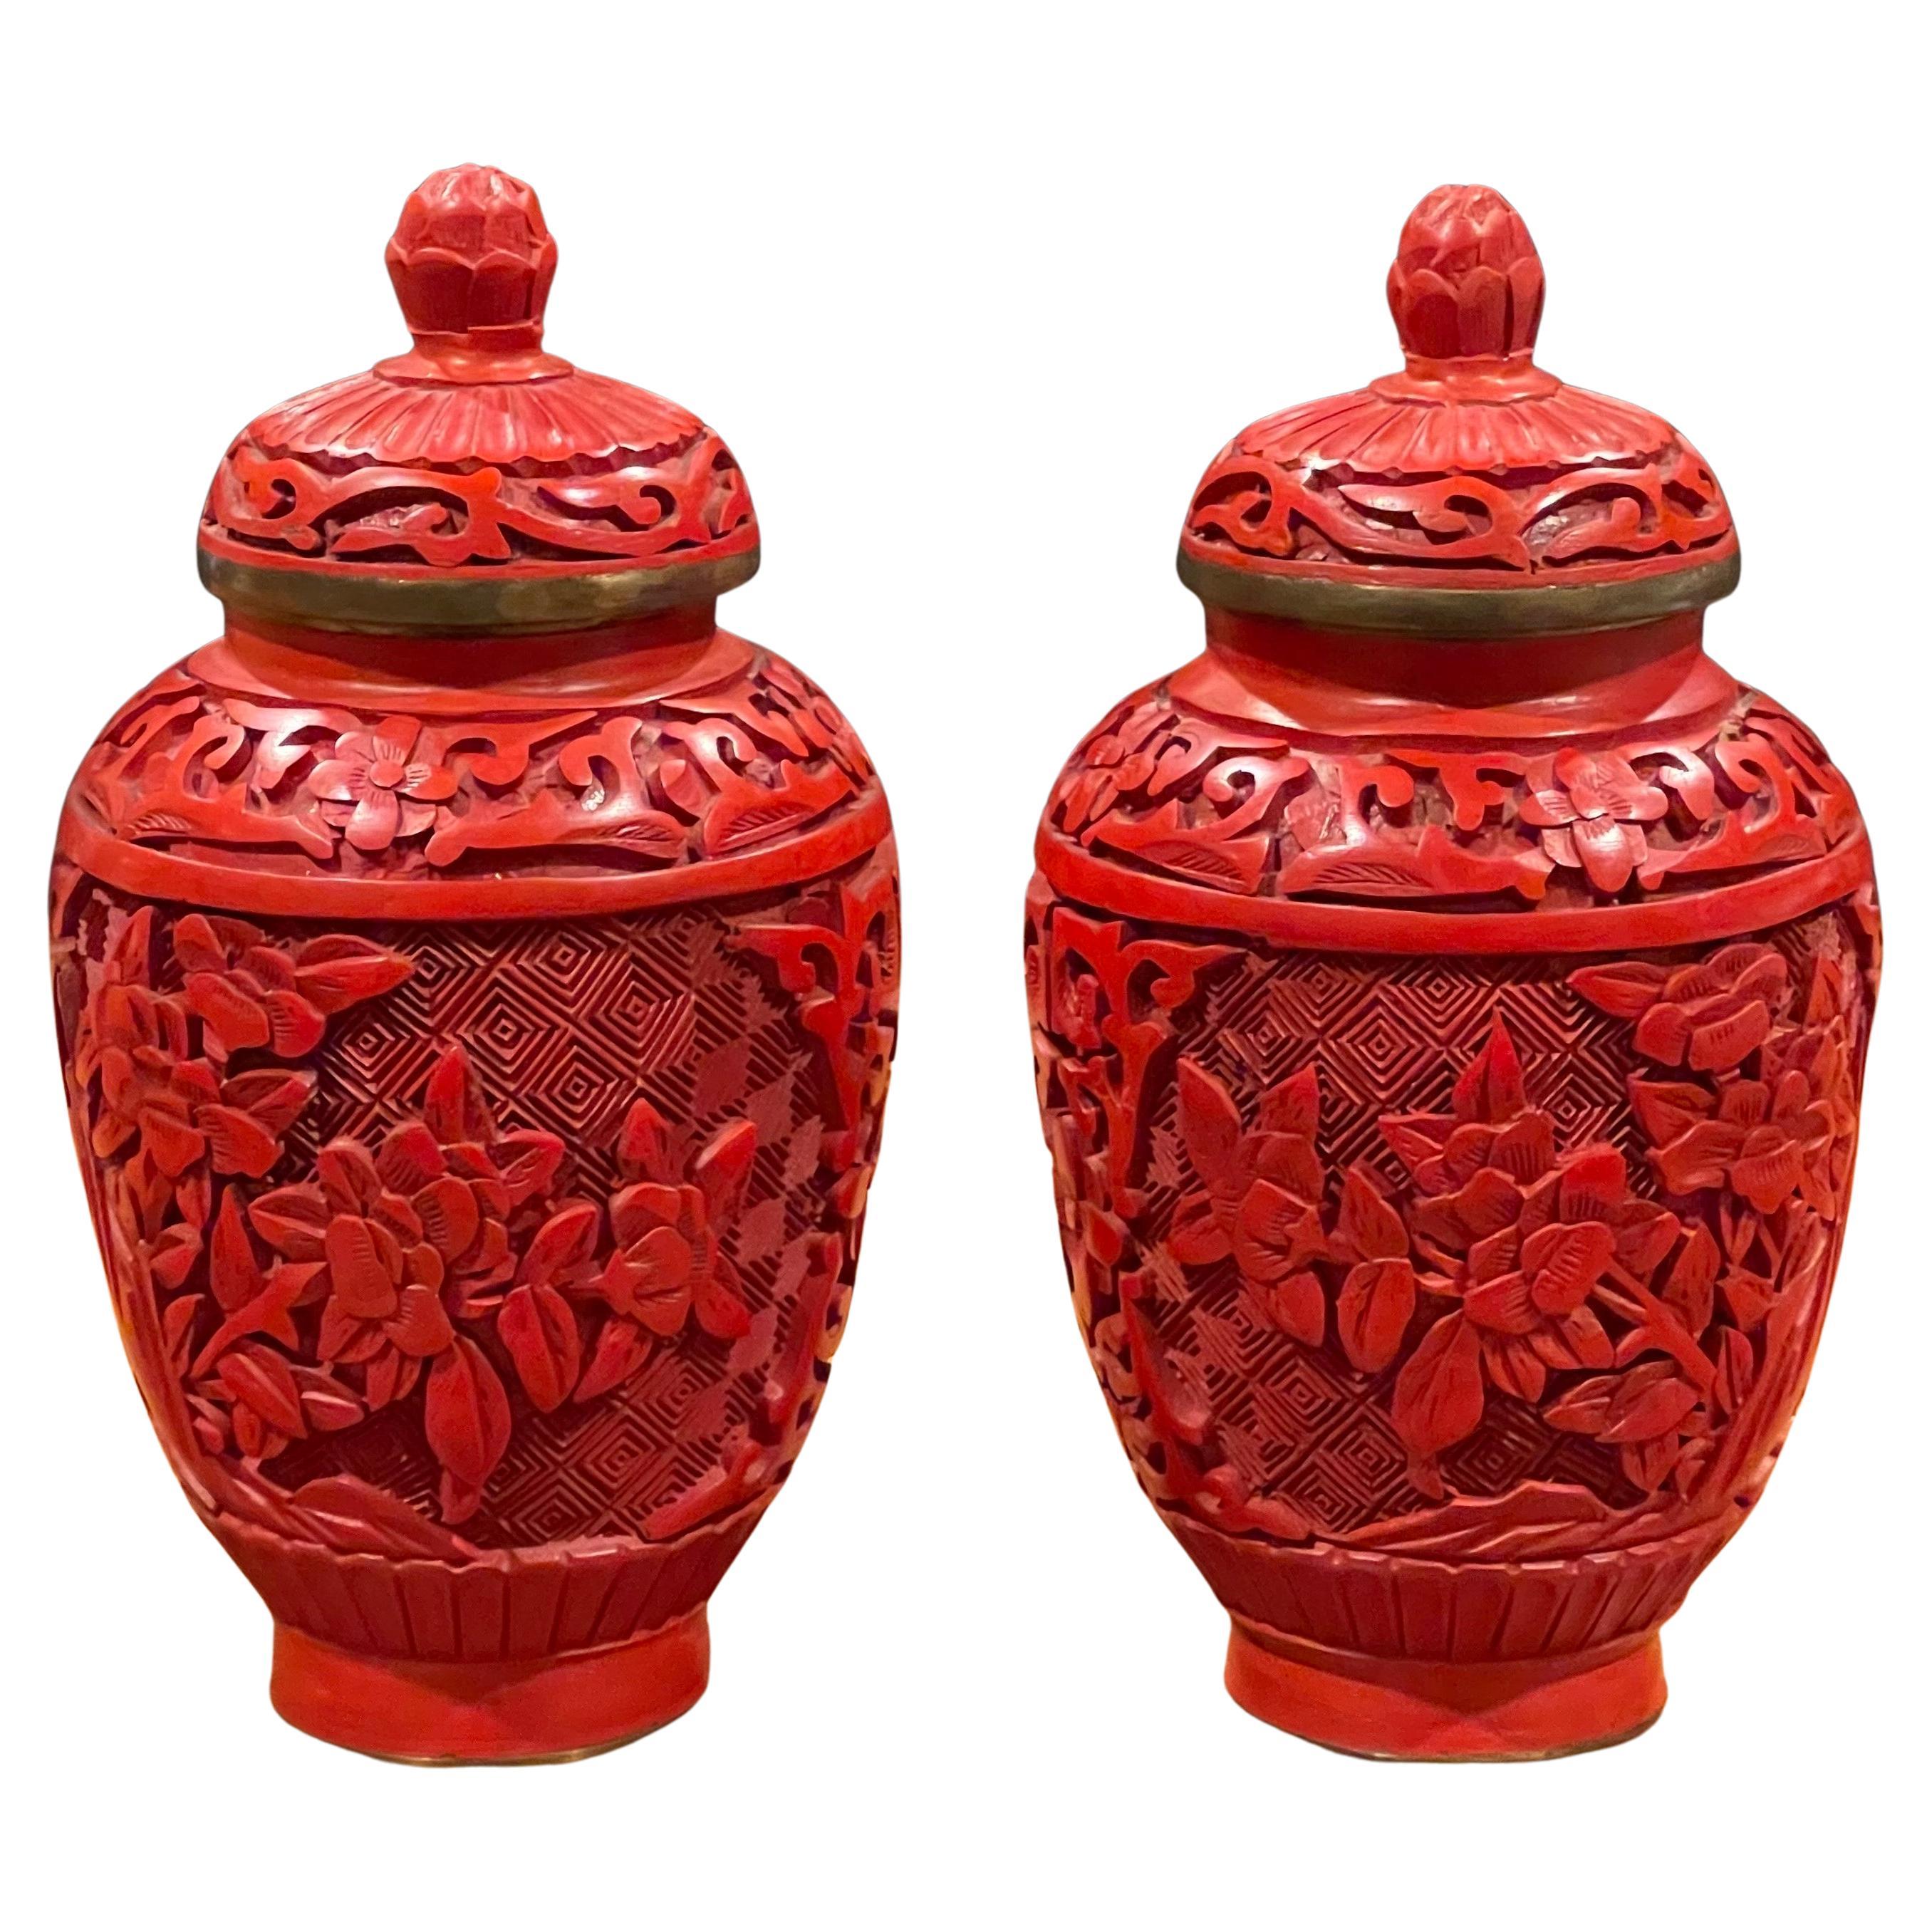 A very well crafted pair of Chinese mirror image cinnabar lacquered petite temple jars, circa 1970's. The vases are 5.25